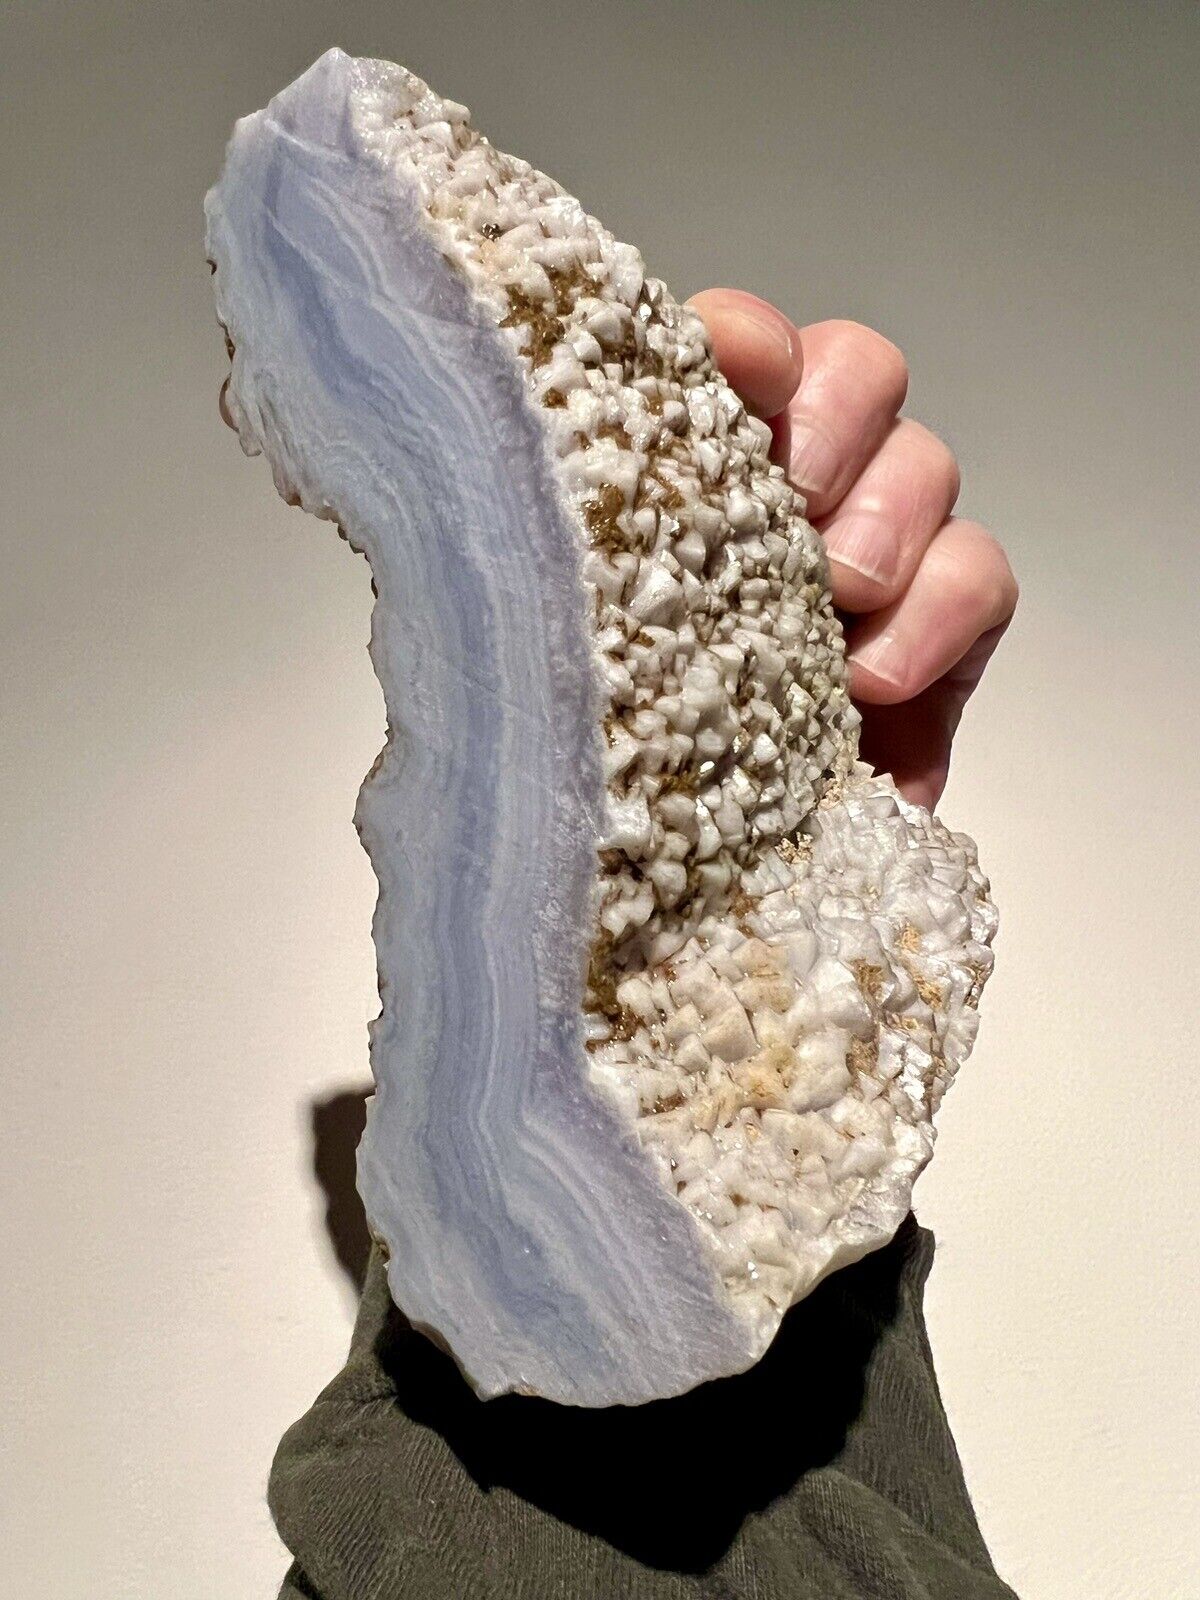 2.0 Pound: Blue Lace Agate Rough Endcut from Namibia, Africa . . .